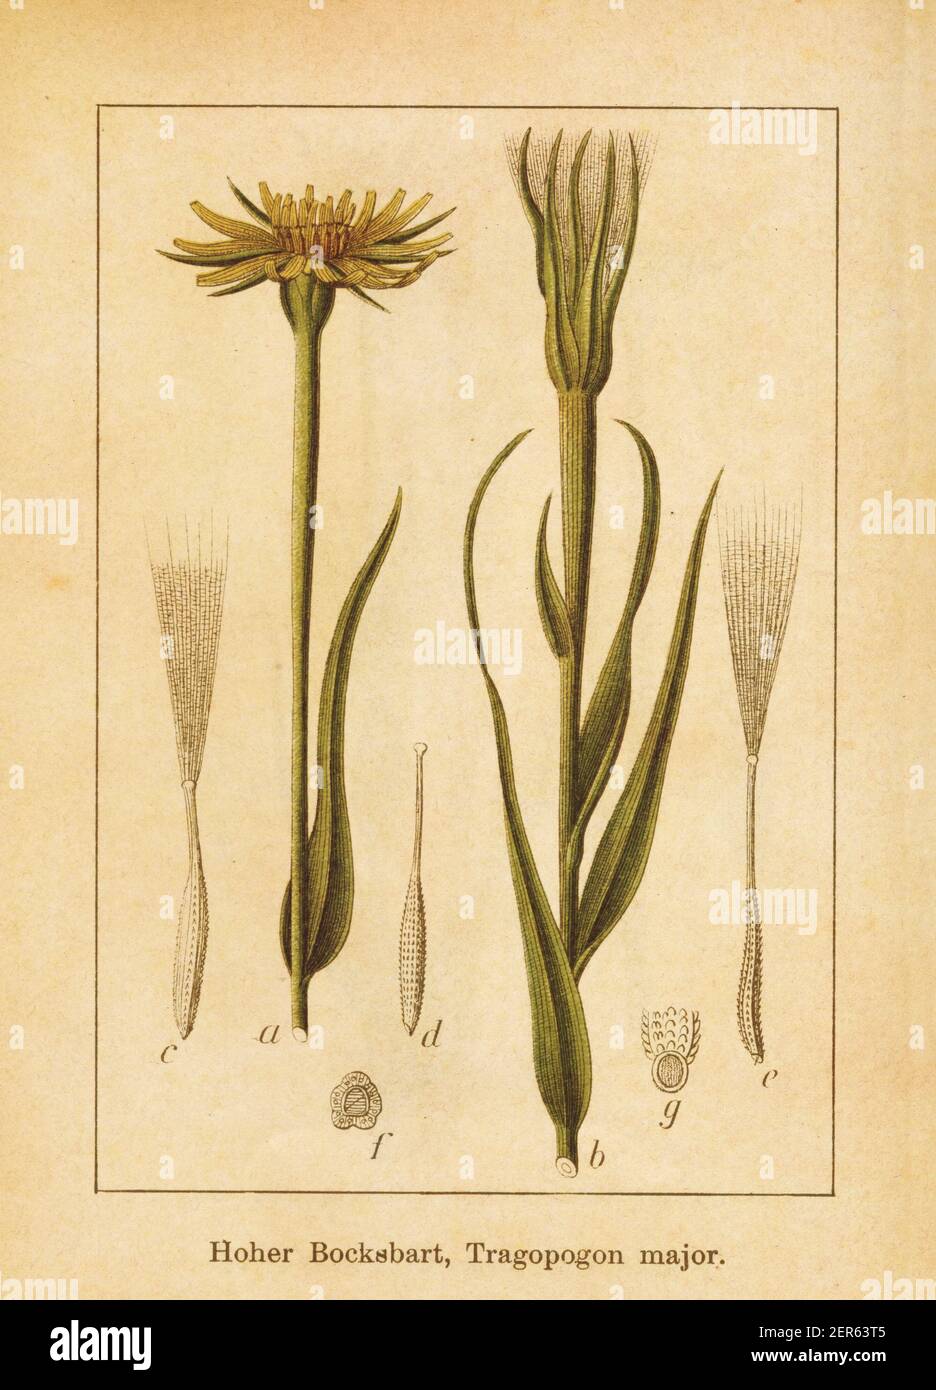 Antique illustration of a tragopogon dubius, also known as tragopogon major, yellow salsify, Western salsify, Western goat's beard, wild oysterplant, Stock Photo